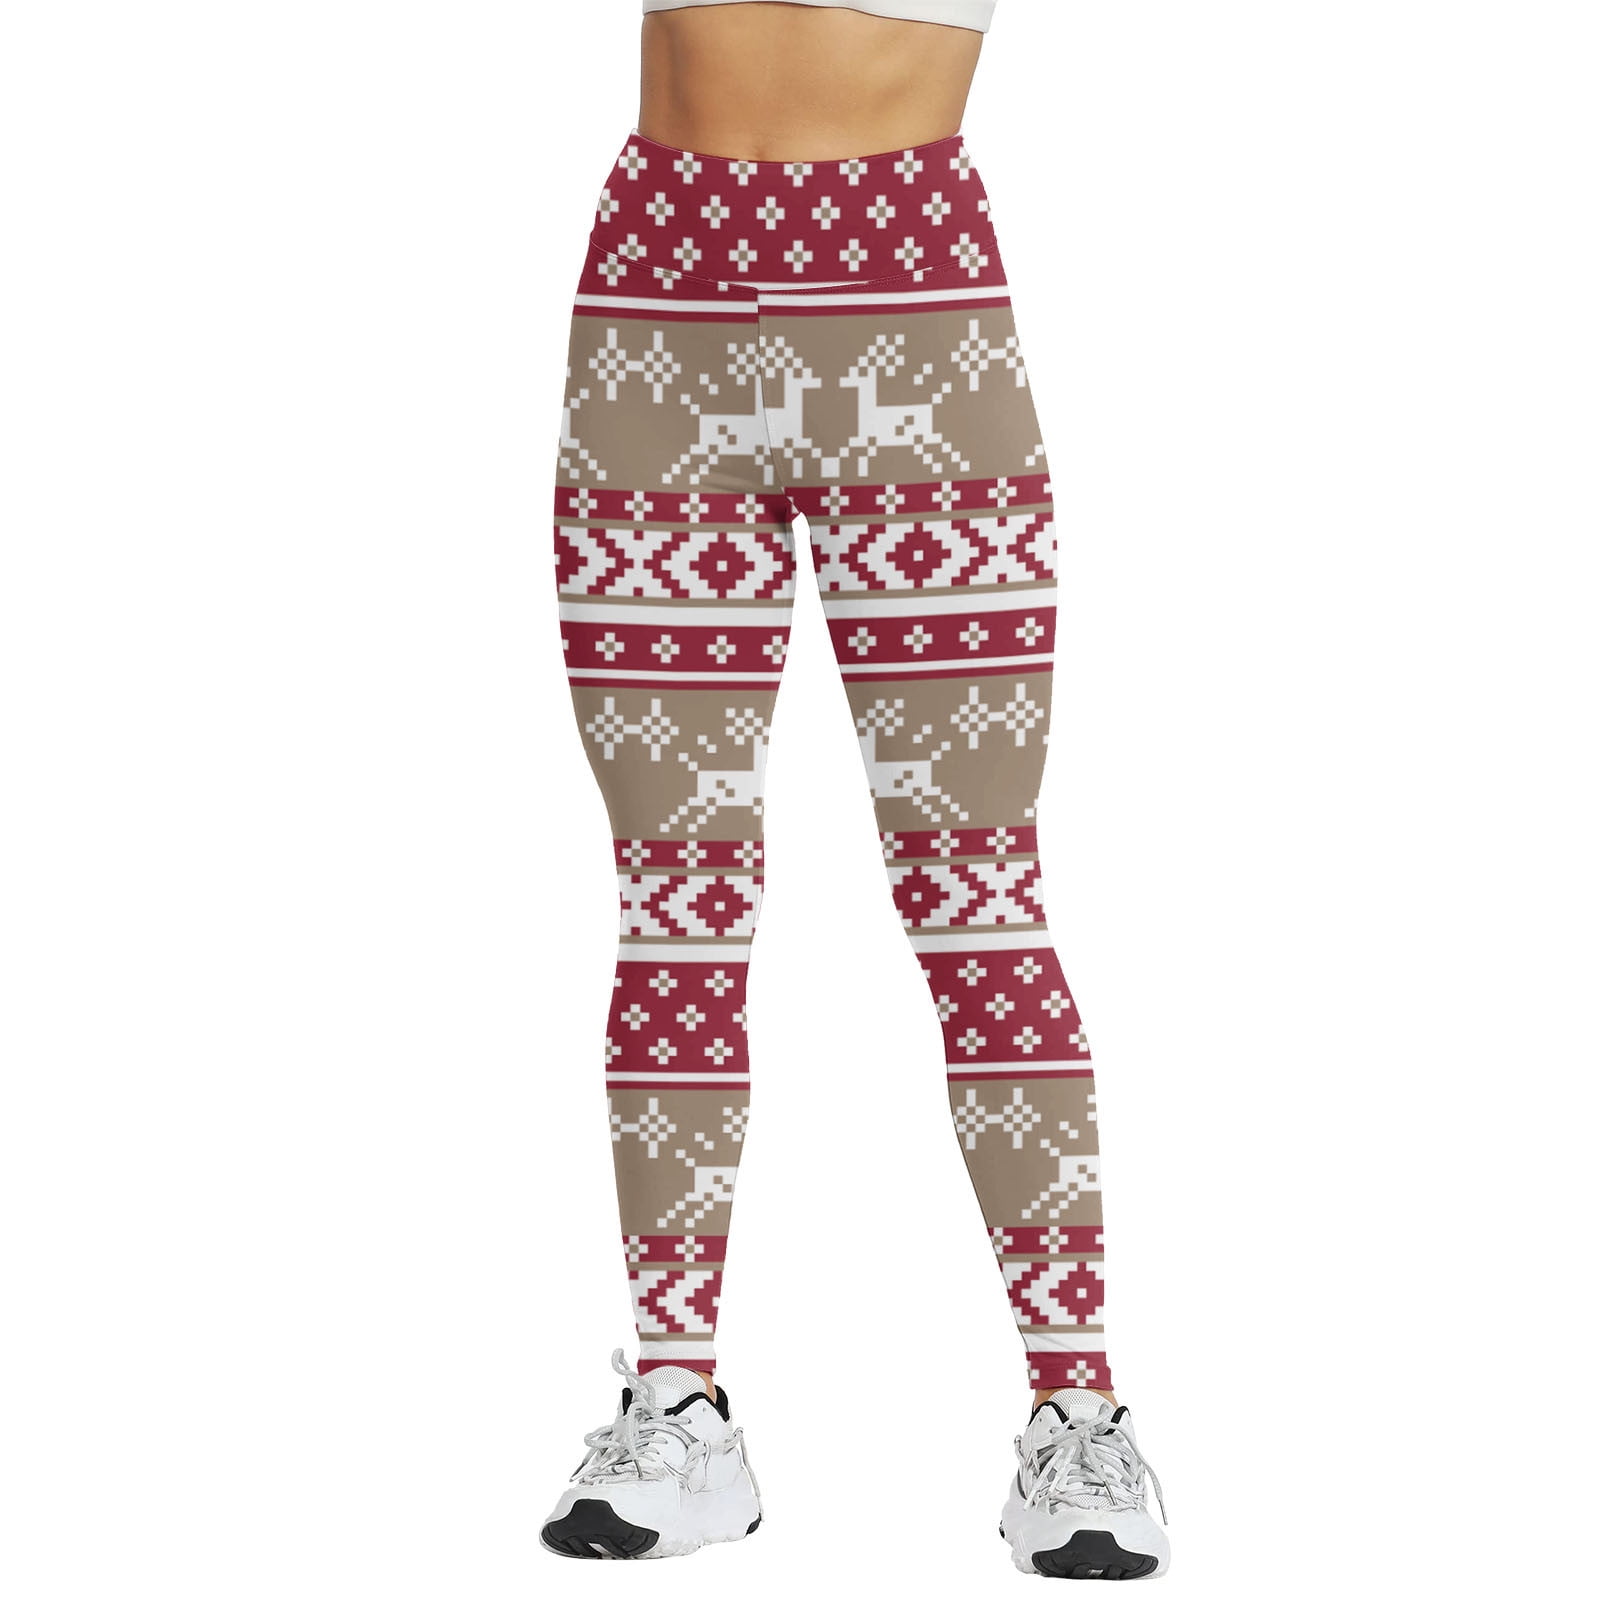 HSMQHJWE Leggingd Plus Size Leggings For Women 3X Christmas Print Series  High Waist Women'S Tights Compression Pants For Yoga Running Gym And Daily  Fitness High Waist Leggings Plus Size Leggings For 